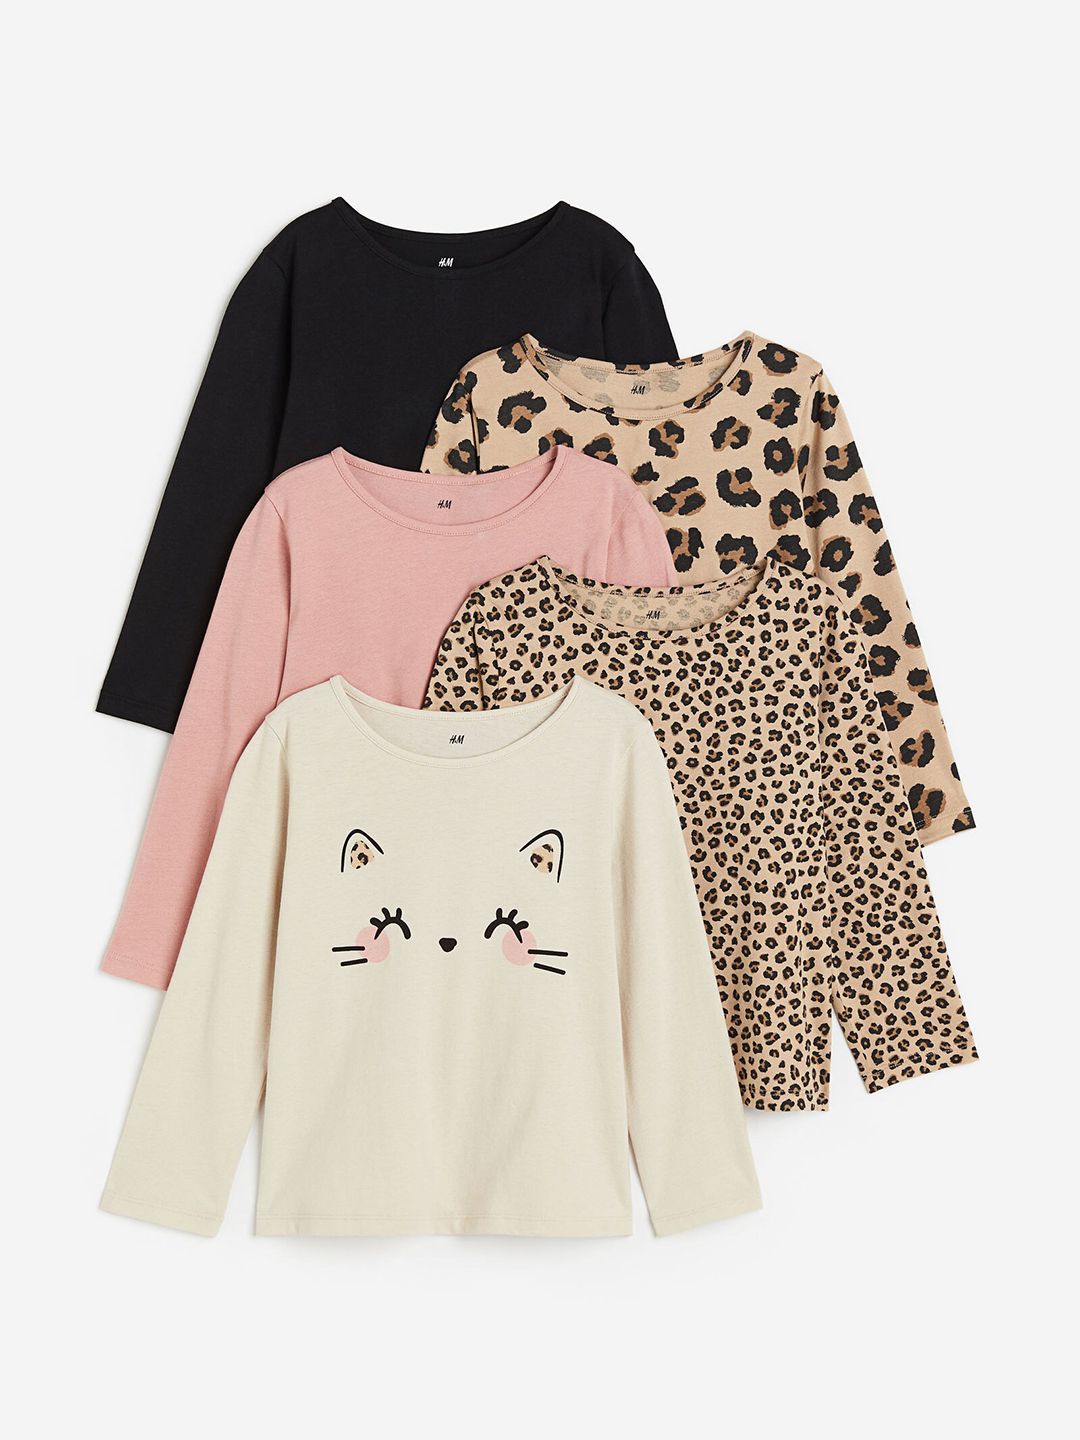 H&M Girls 5-Pack Long-Sleeved Tops Price in India